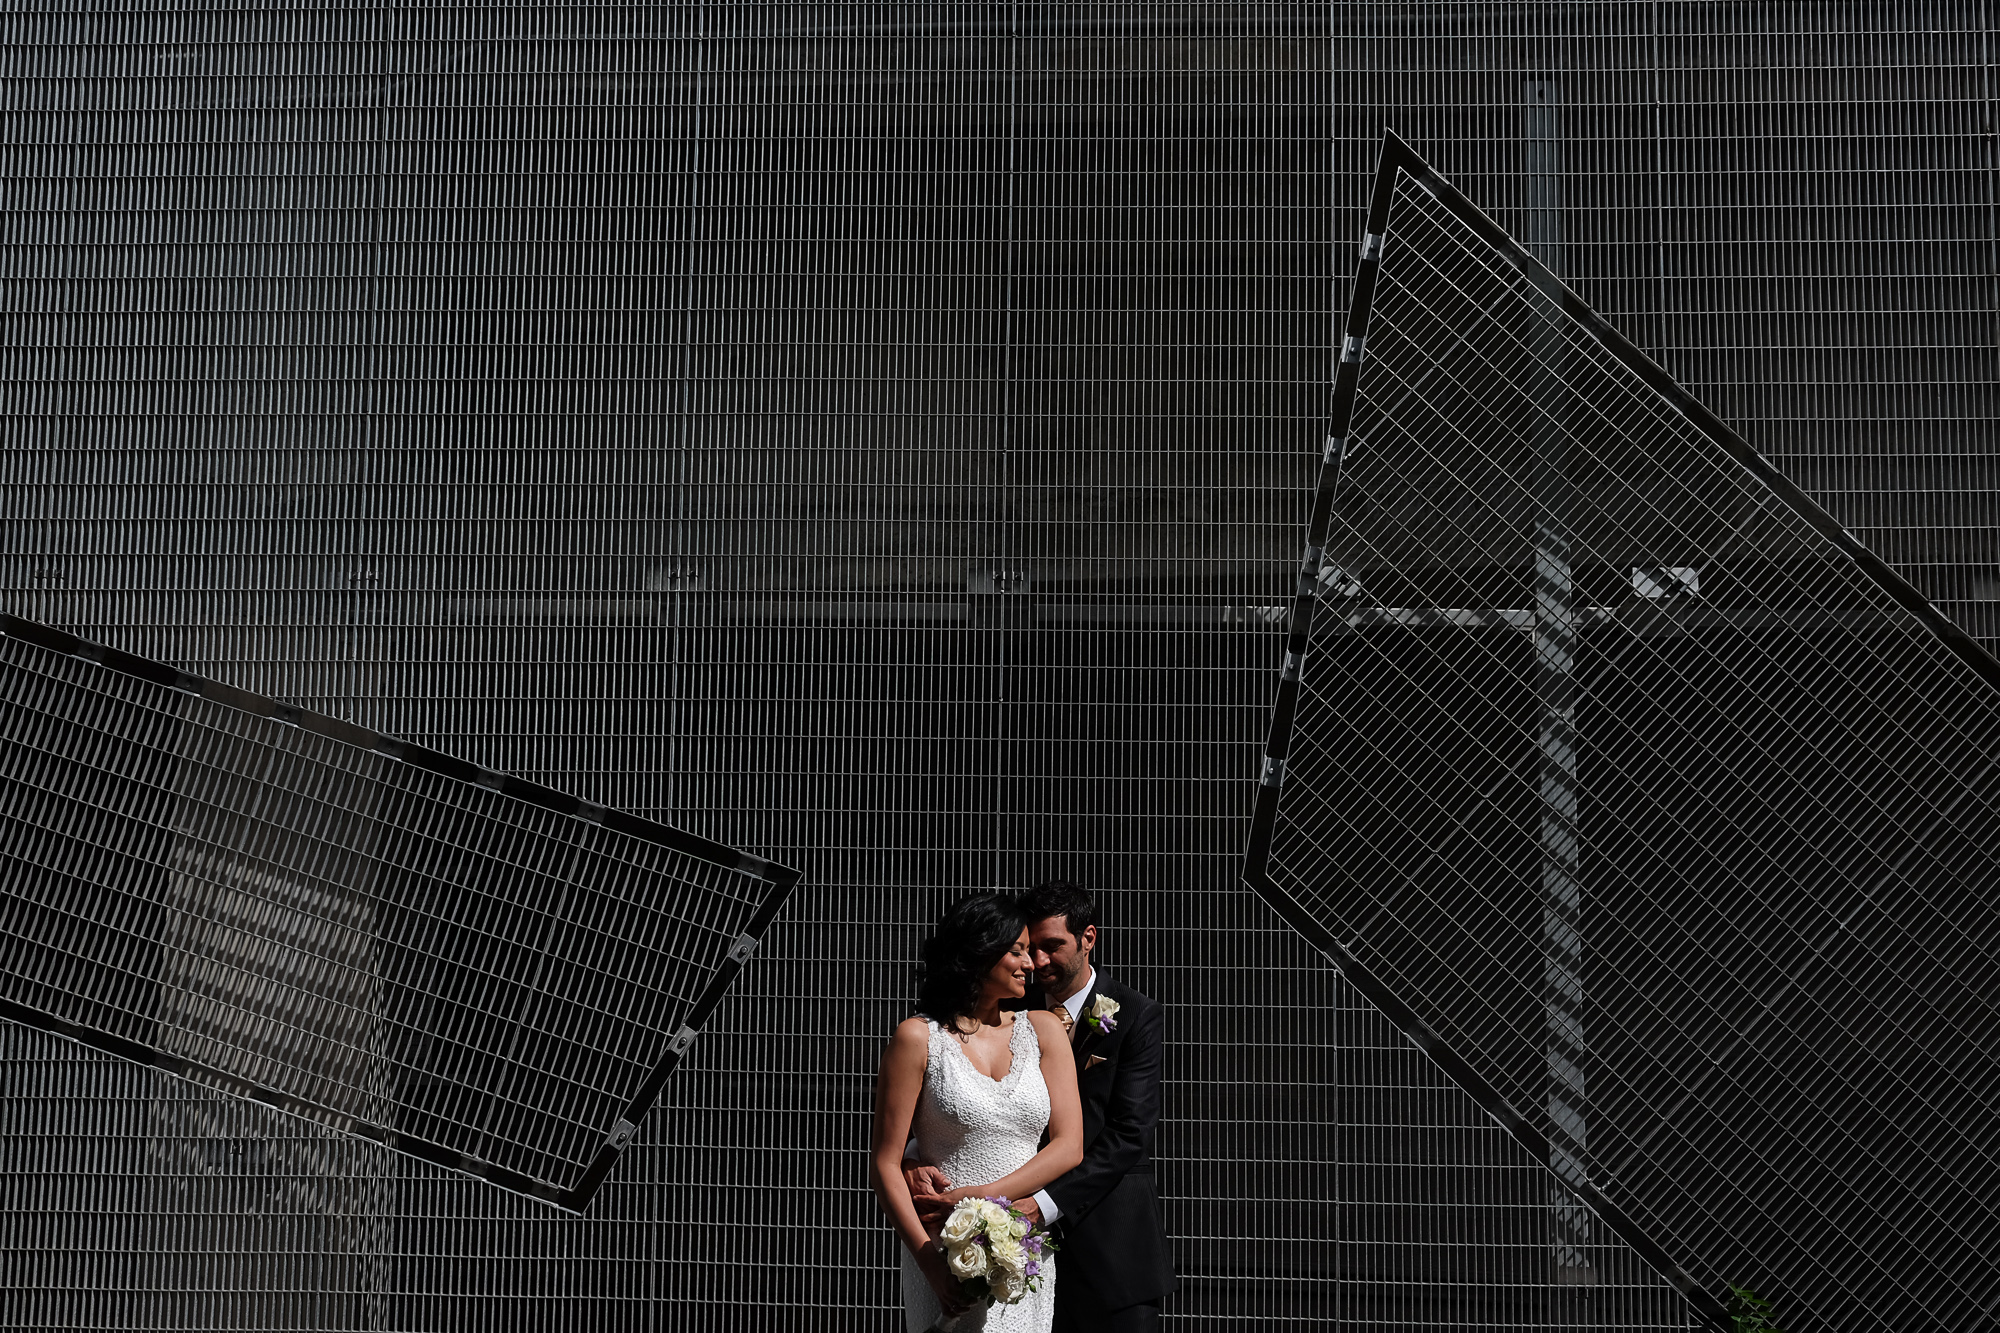  Maria + Theo pose for a midday wedding portrait just outside the Art Gallery of Ontario in Toronto. 